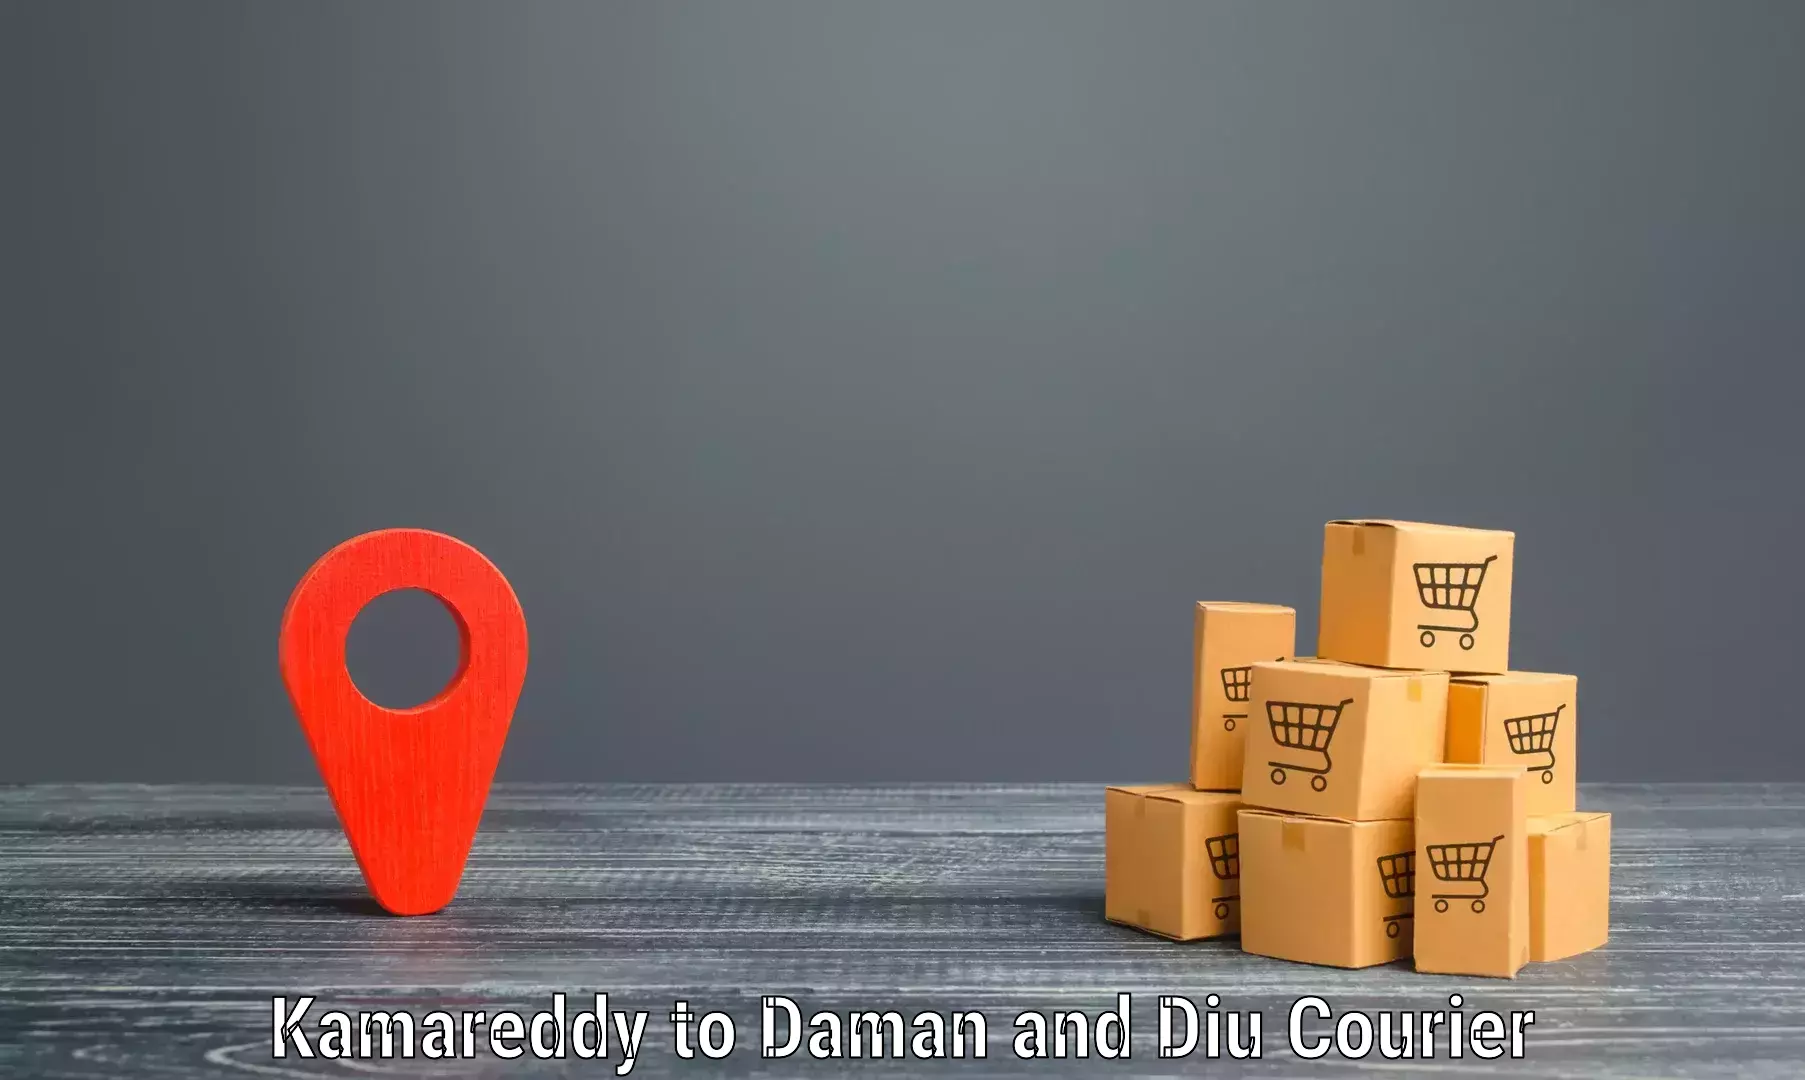 High-speed parcel service Kamareddy to Daman and Diu